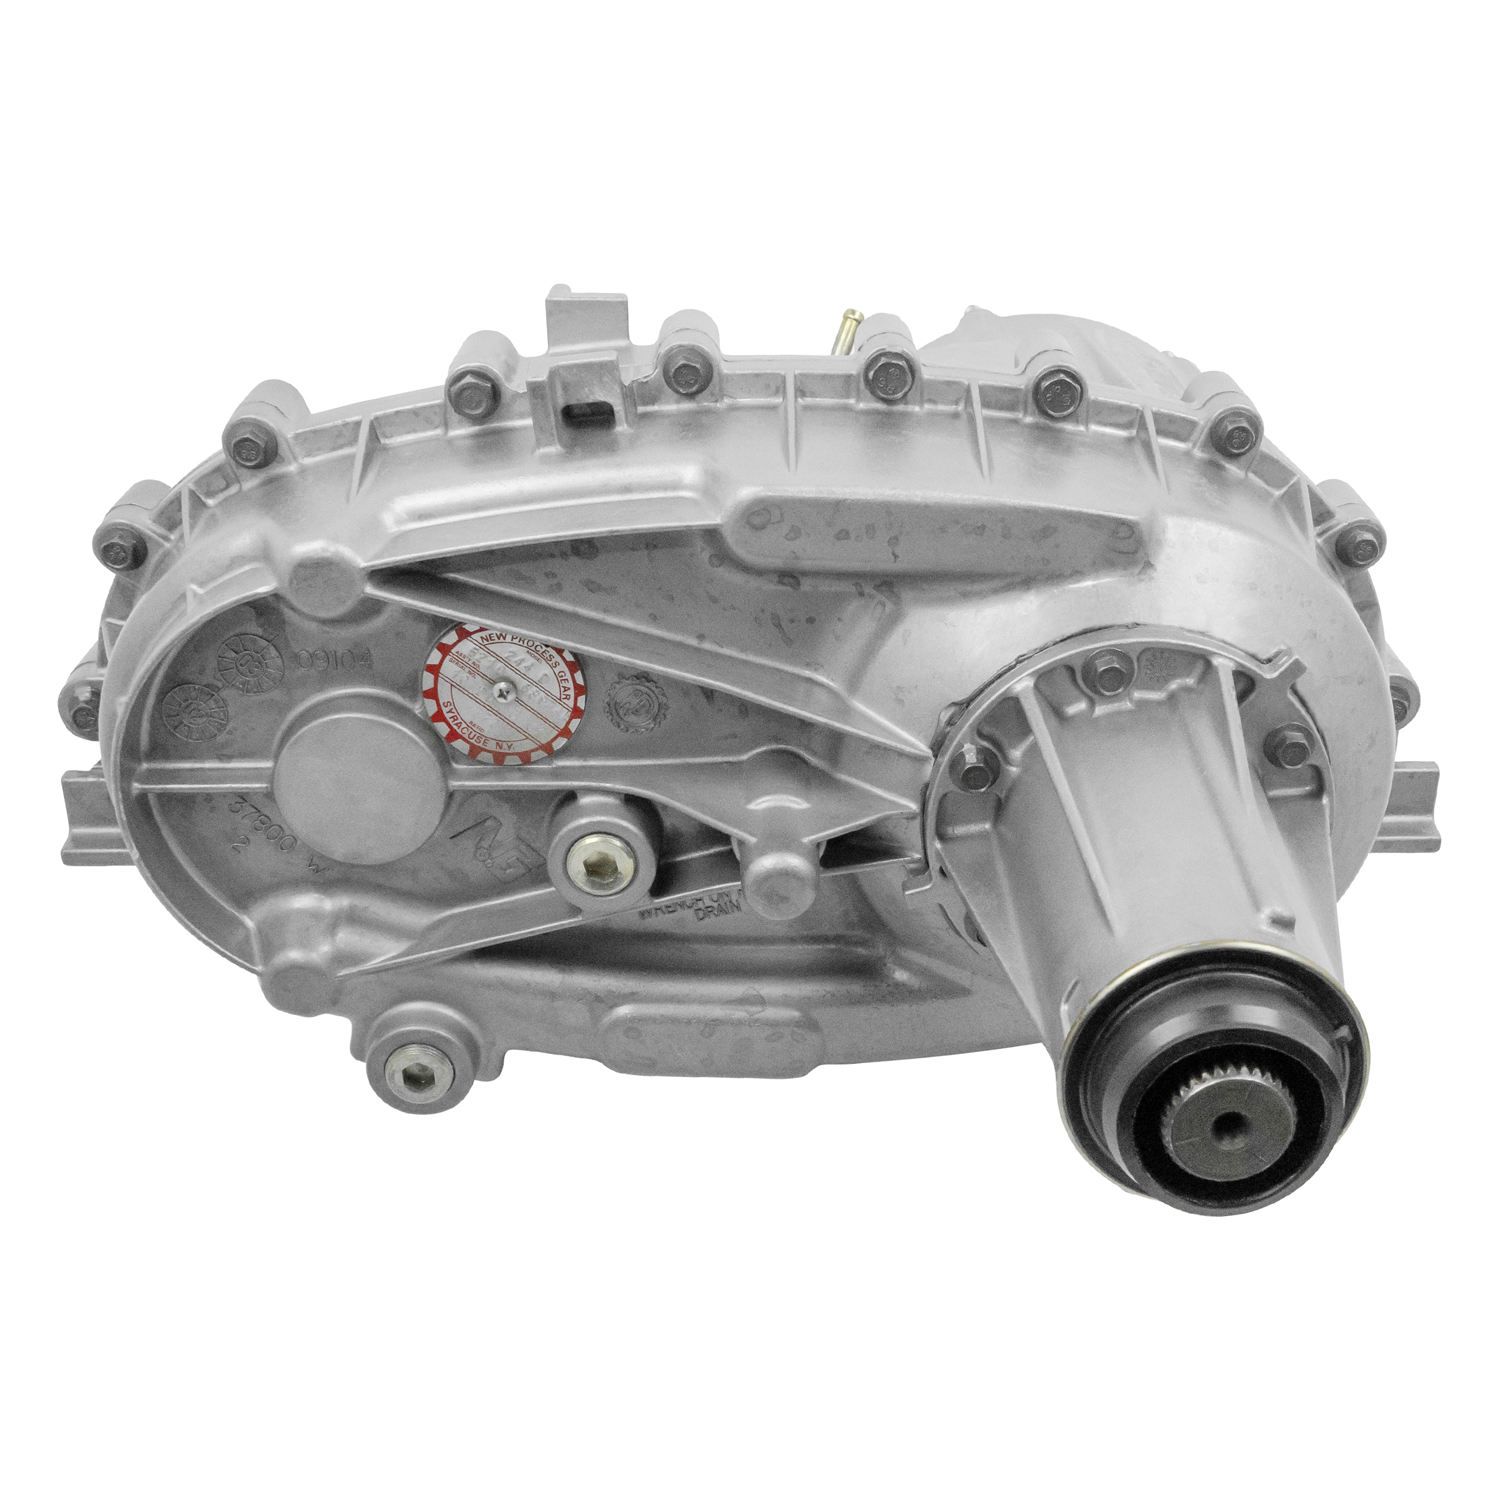 Zumbrota Remanufactured Transfer Case NP244 with Shift Motor 2004-2009 Chrysler